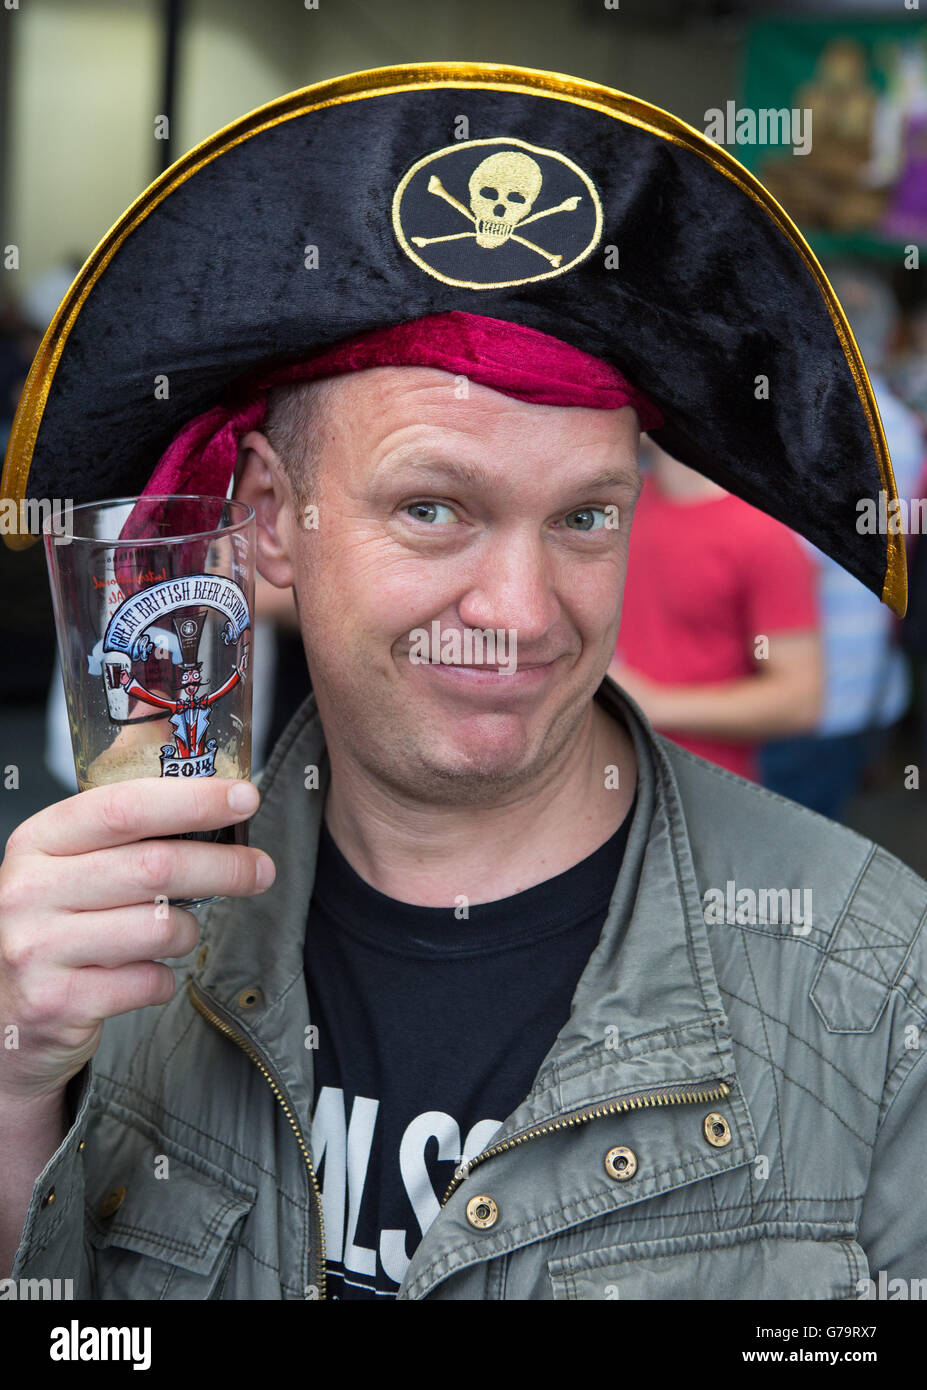 A beer drinker dressed as pirate enjoying the Great British Beer Festival at Olympia London, where Prince Harry made an unofficial visit yesterday. Stock Photo